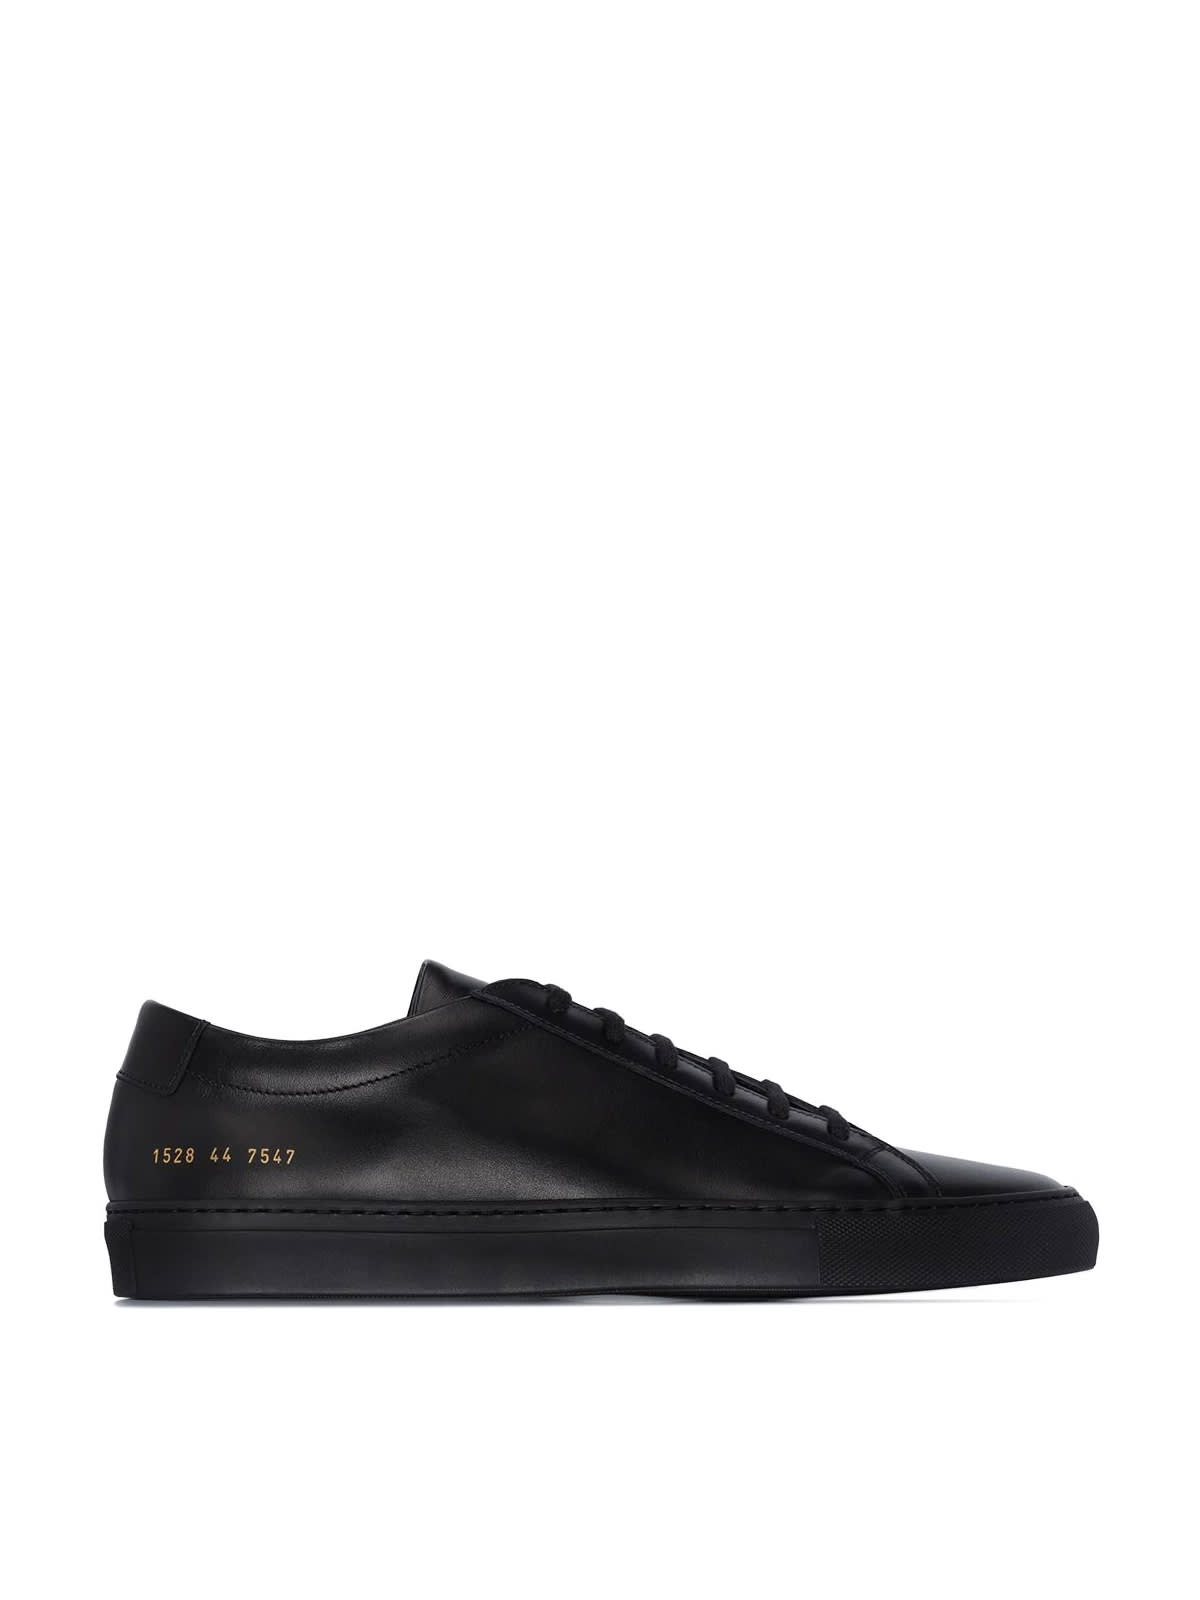 Common Projects 1528 Original Achilles Low Sneakers